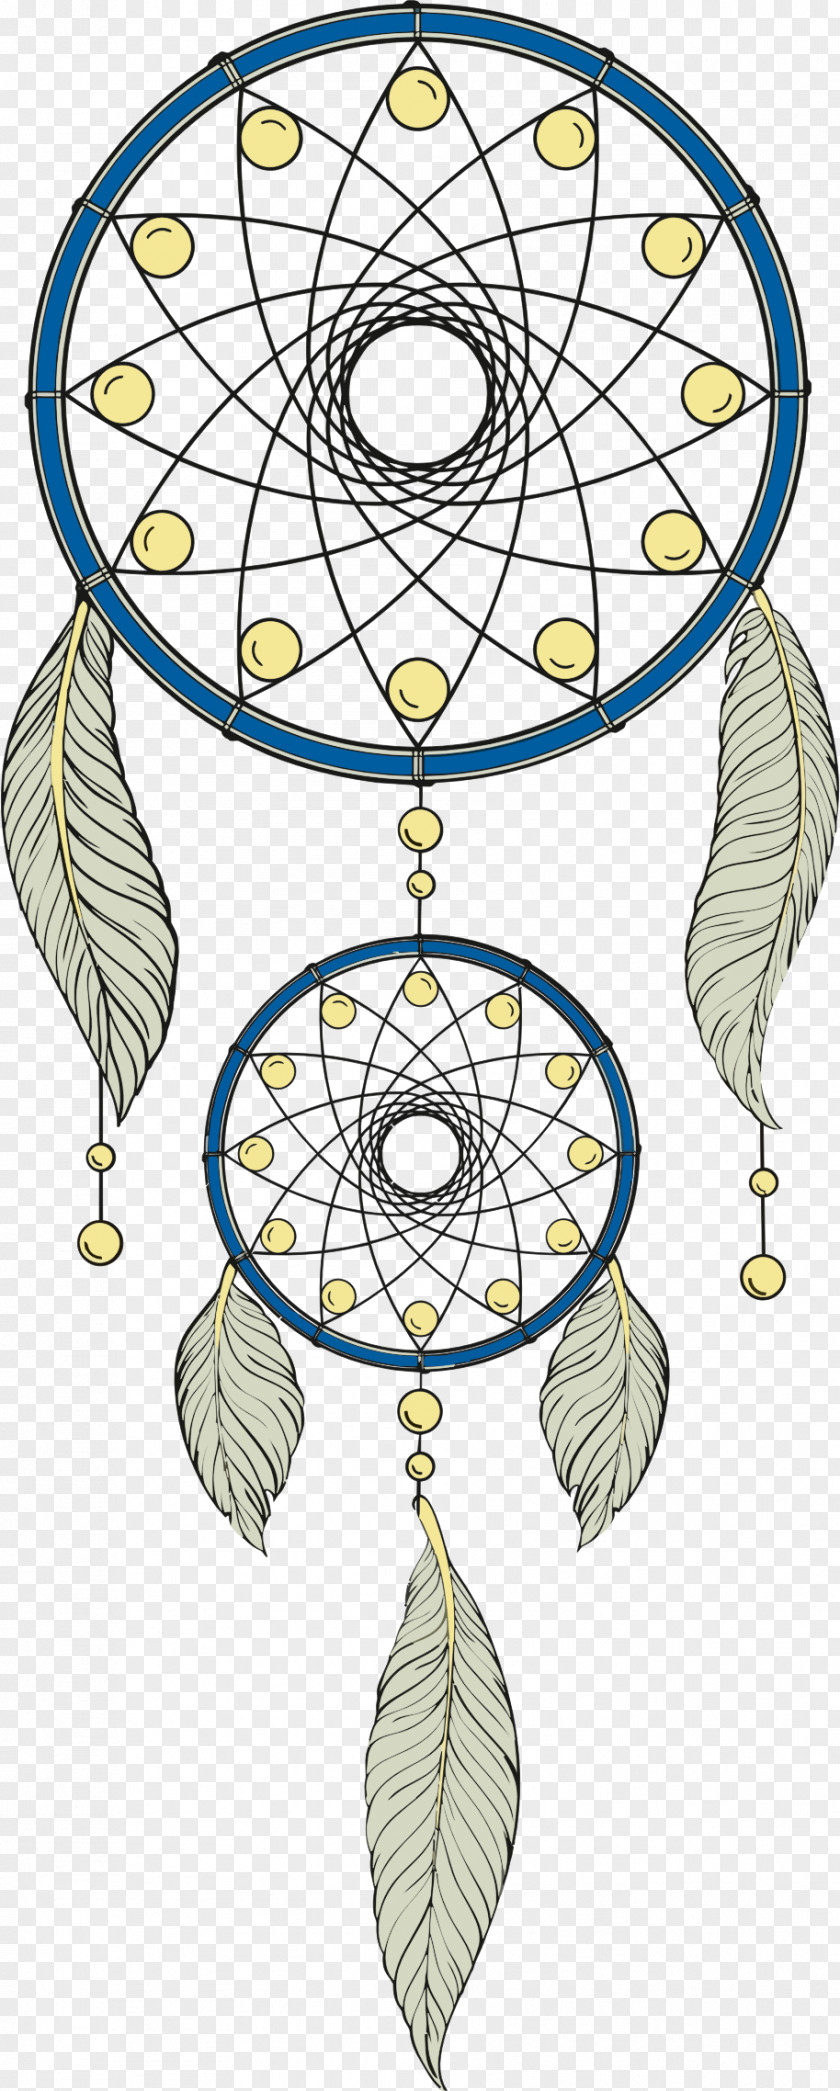 Dreamcatcher Indigenous Peoples Of The Americas Native Americans In United States Clip Art PNG